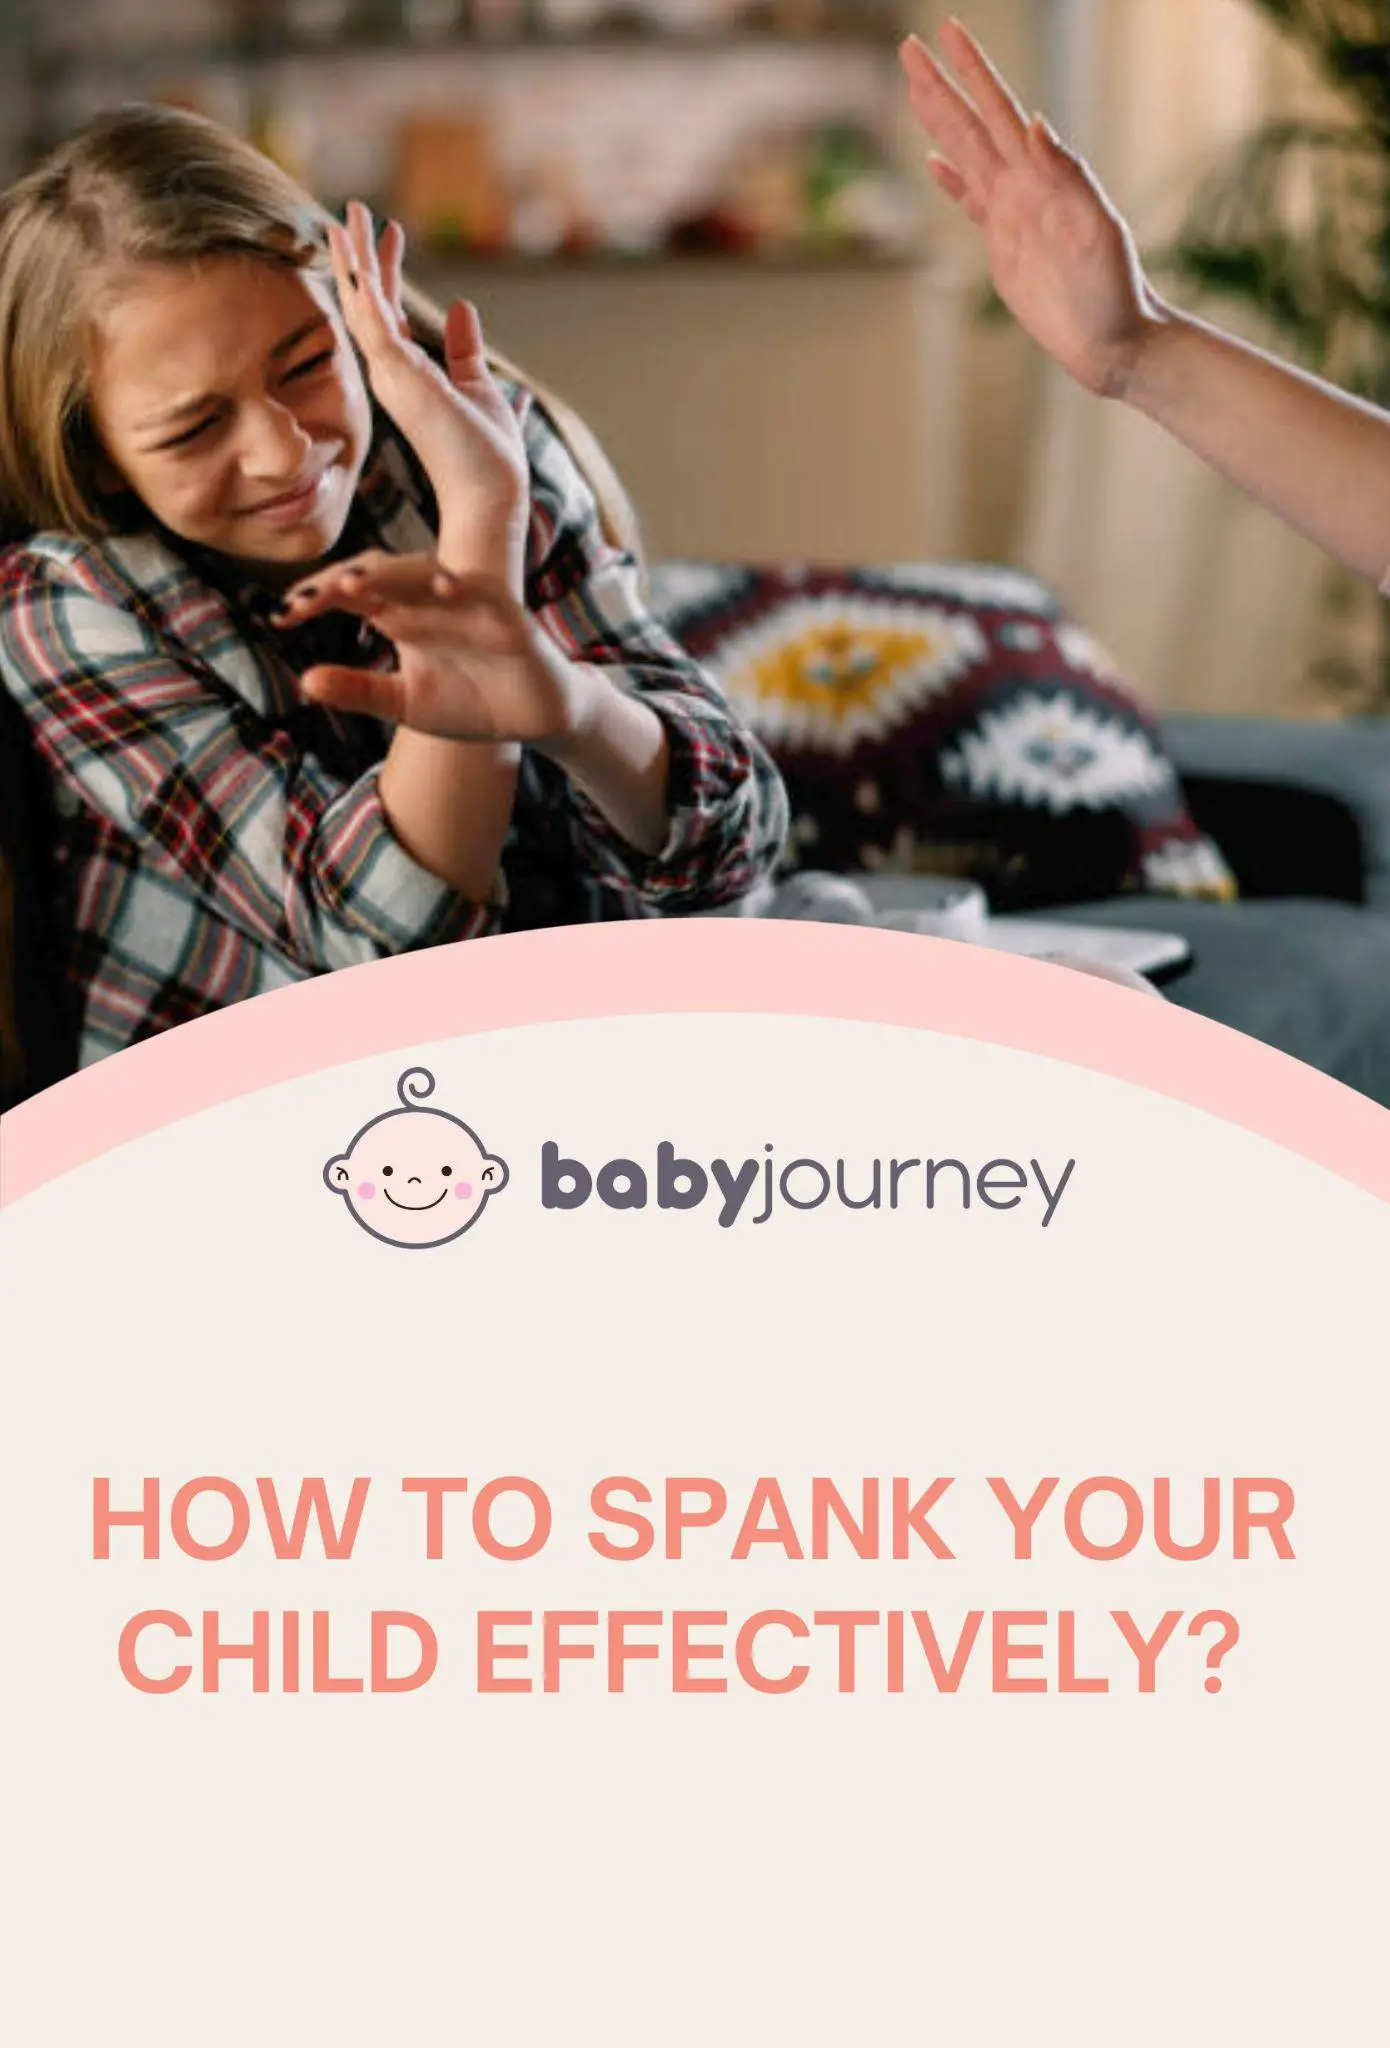 How to Spank Your Child Effectively Pinterest - Baby Journey